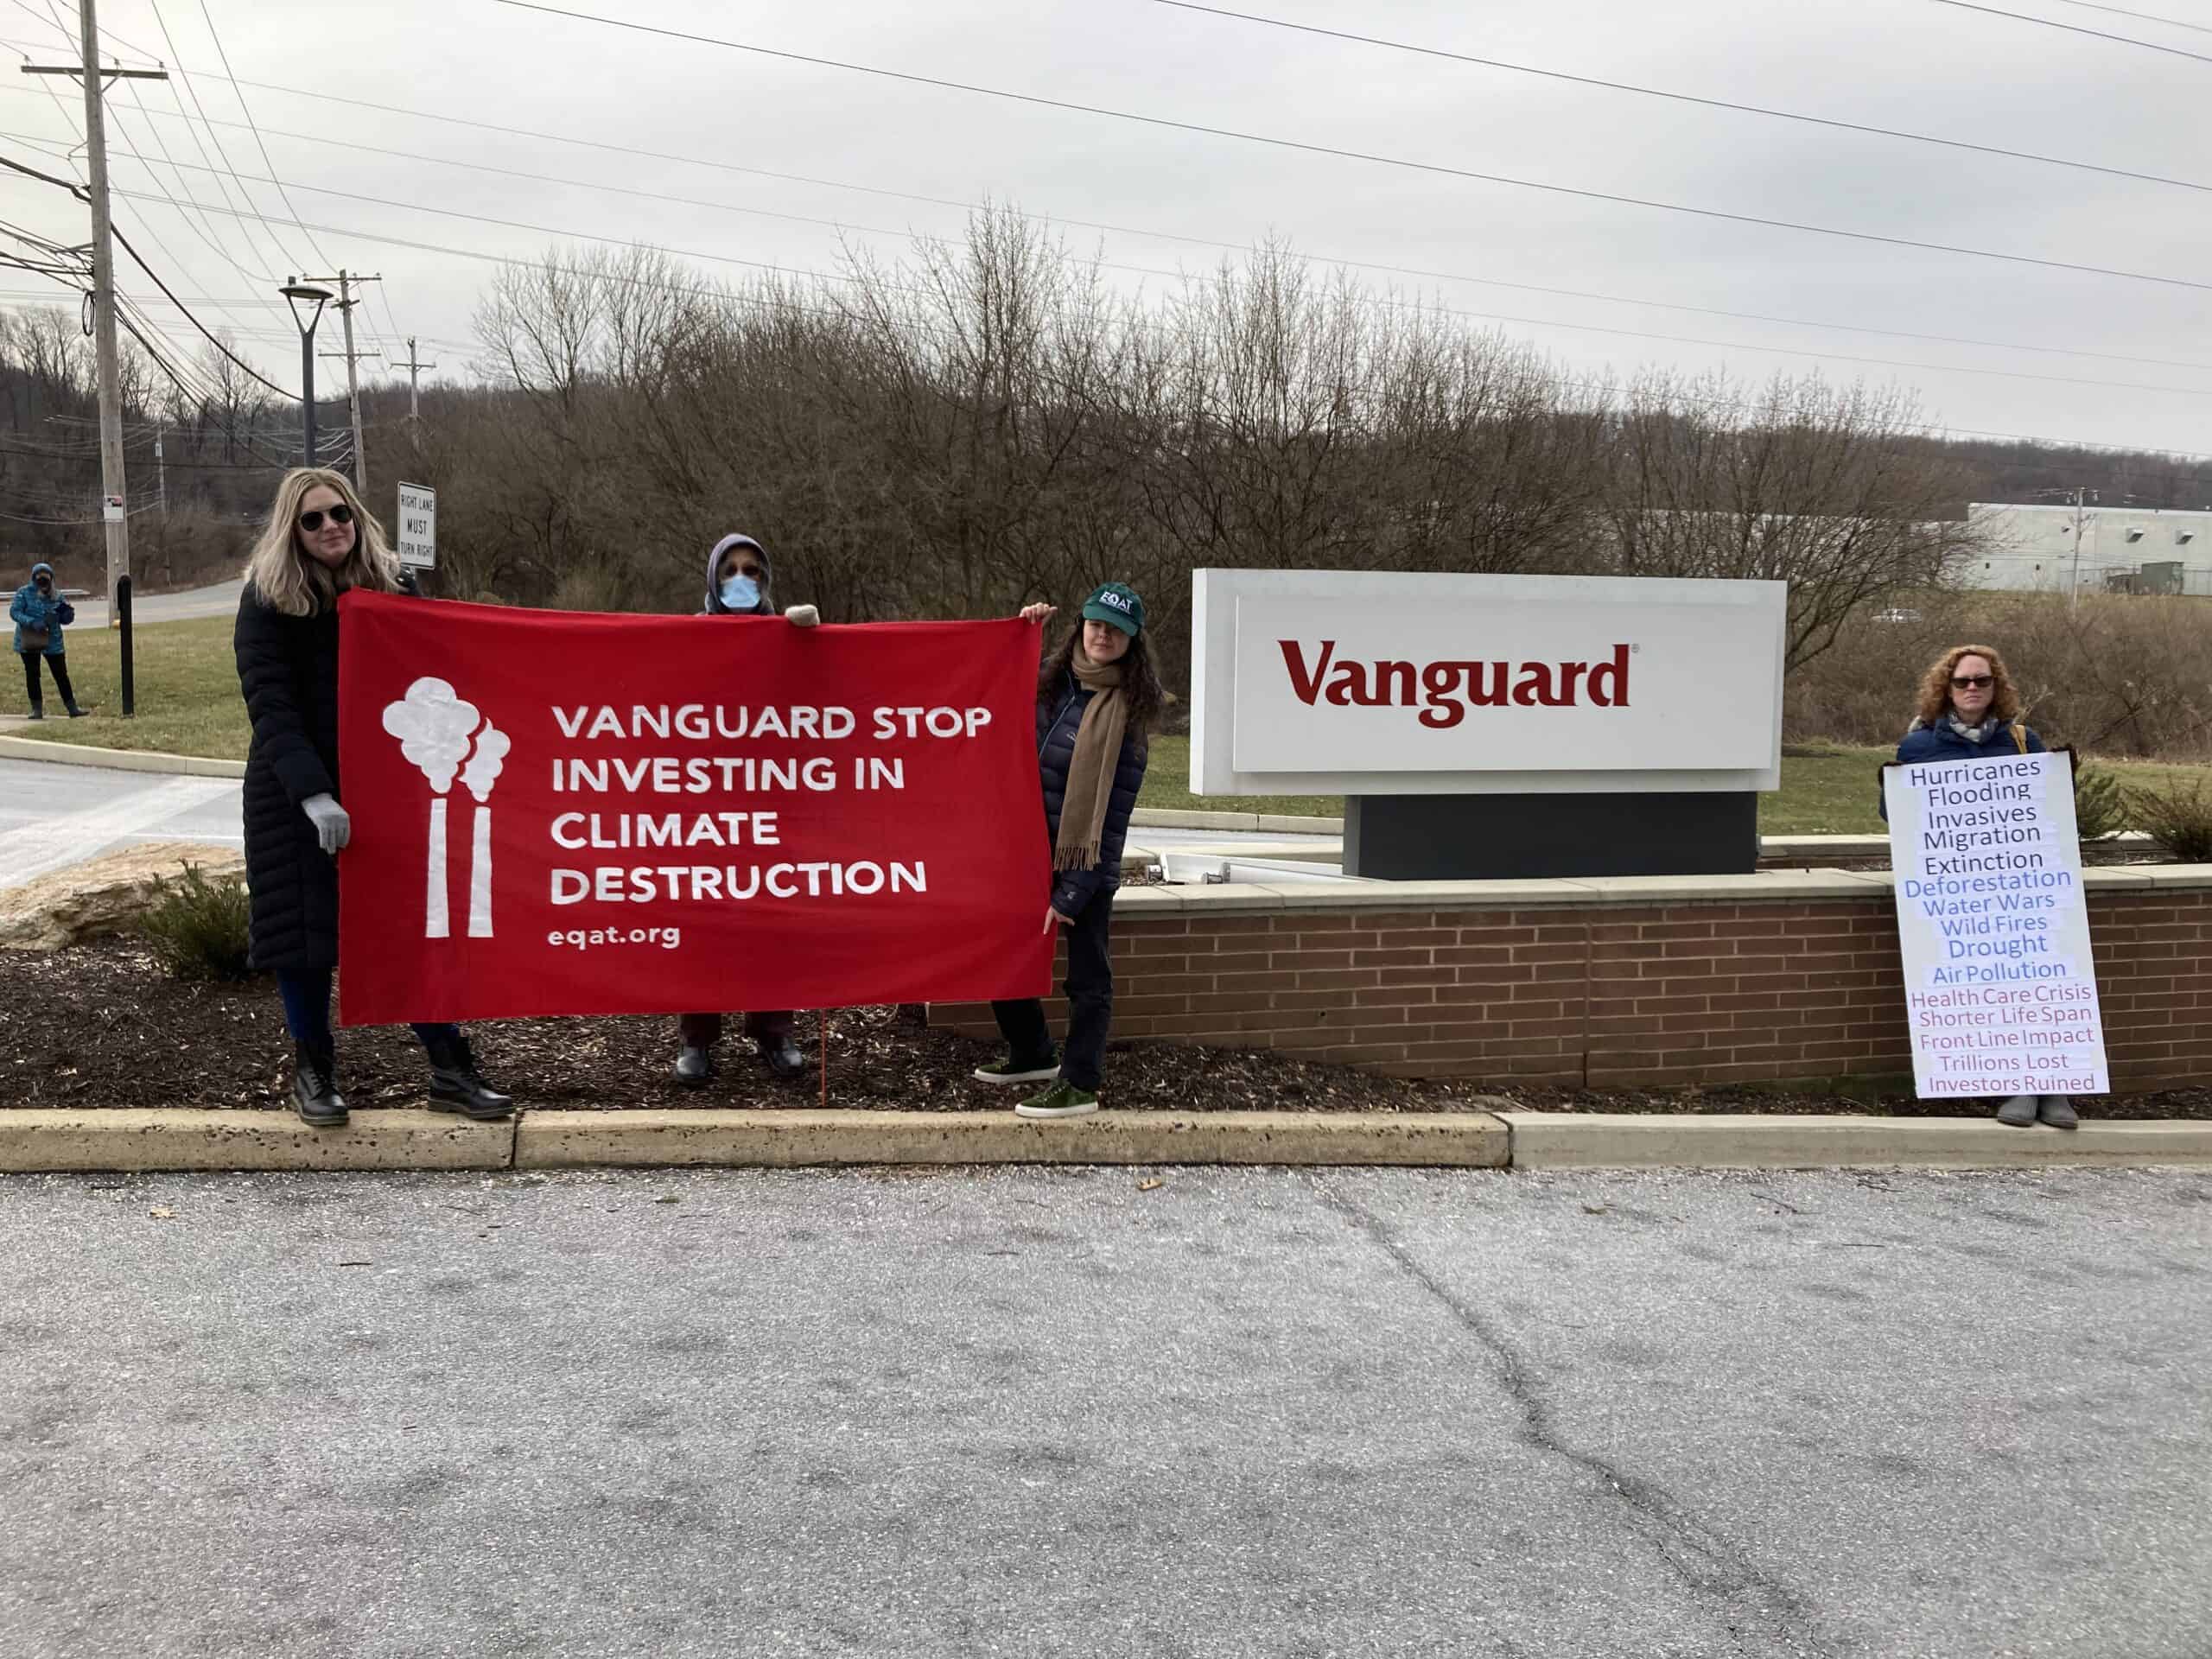 Four people standing in front of Vanguard sign with banner syaing "Vanguard Stop Investing in Climate Destruction."